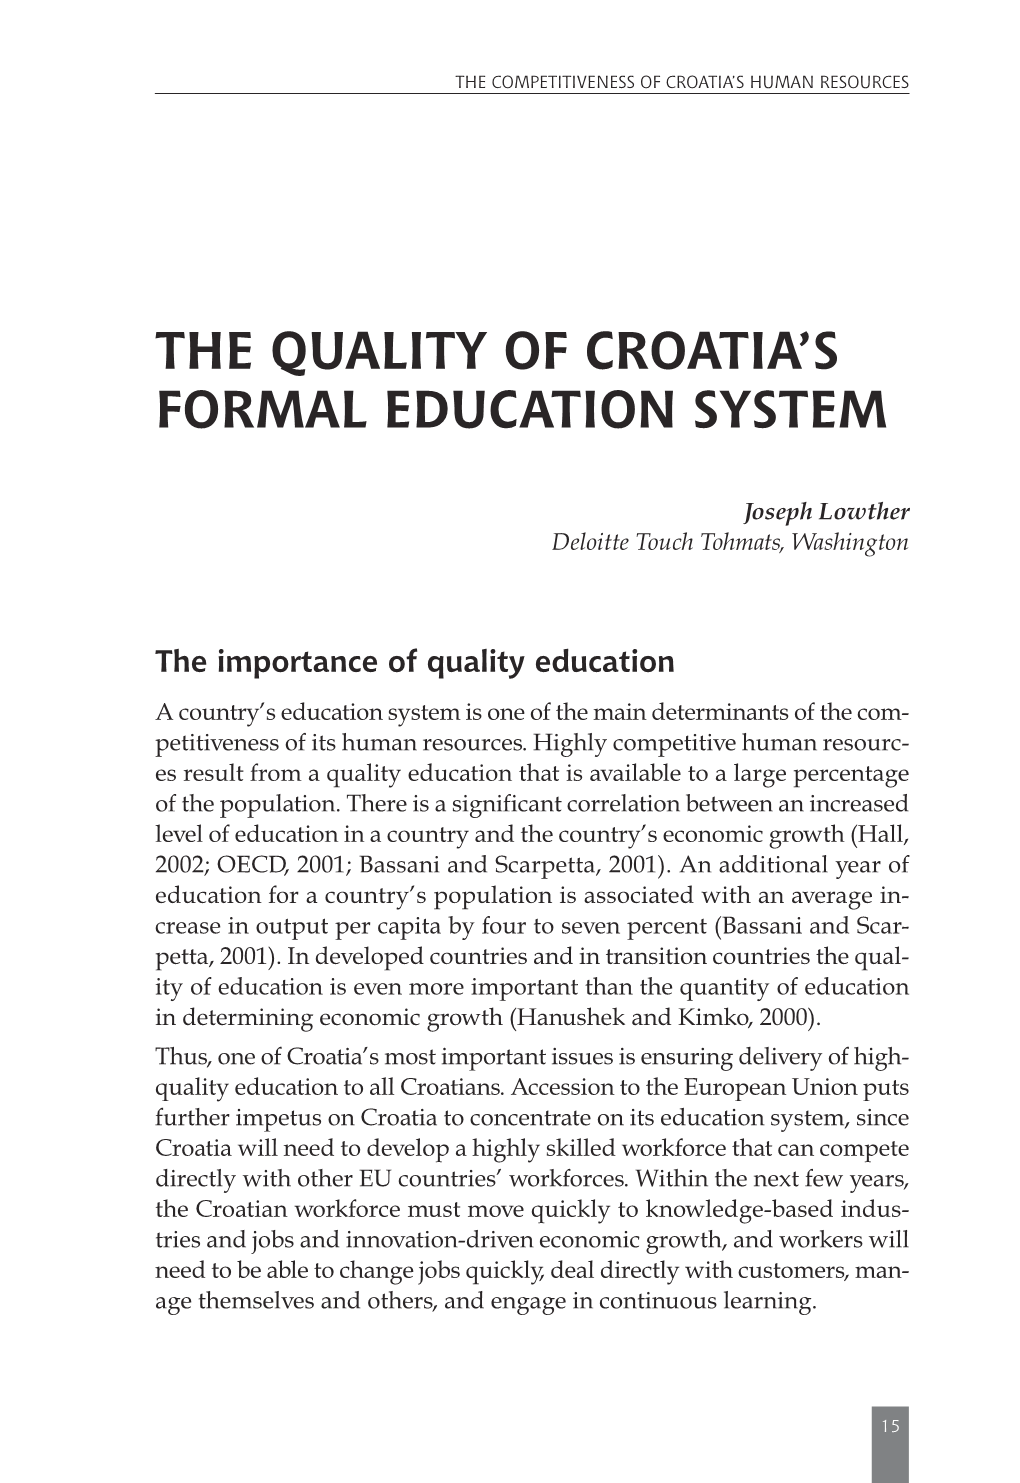 The Quality of Croatia's Formal Education System